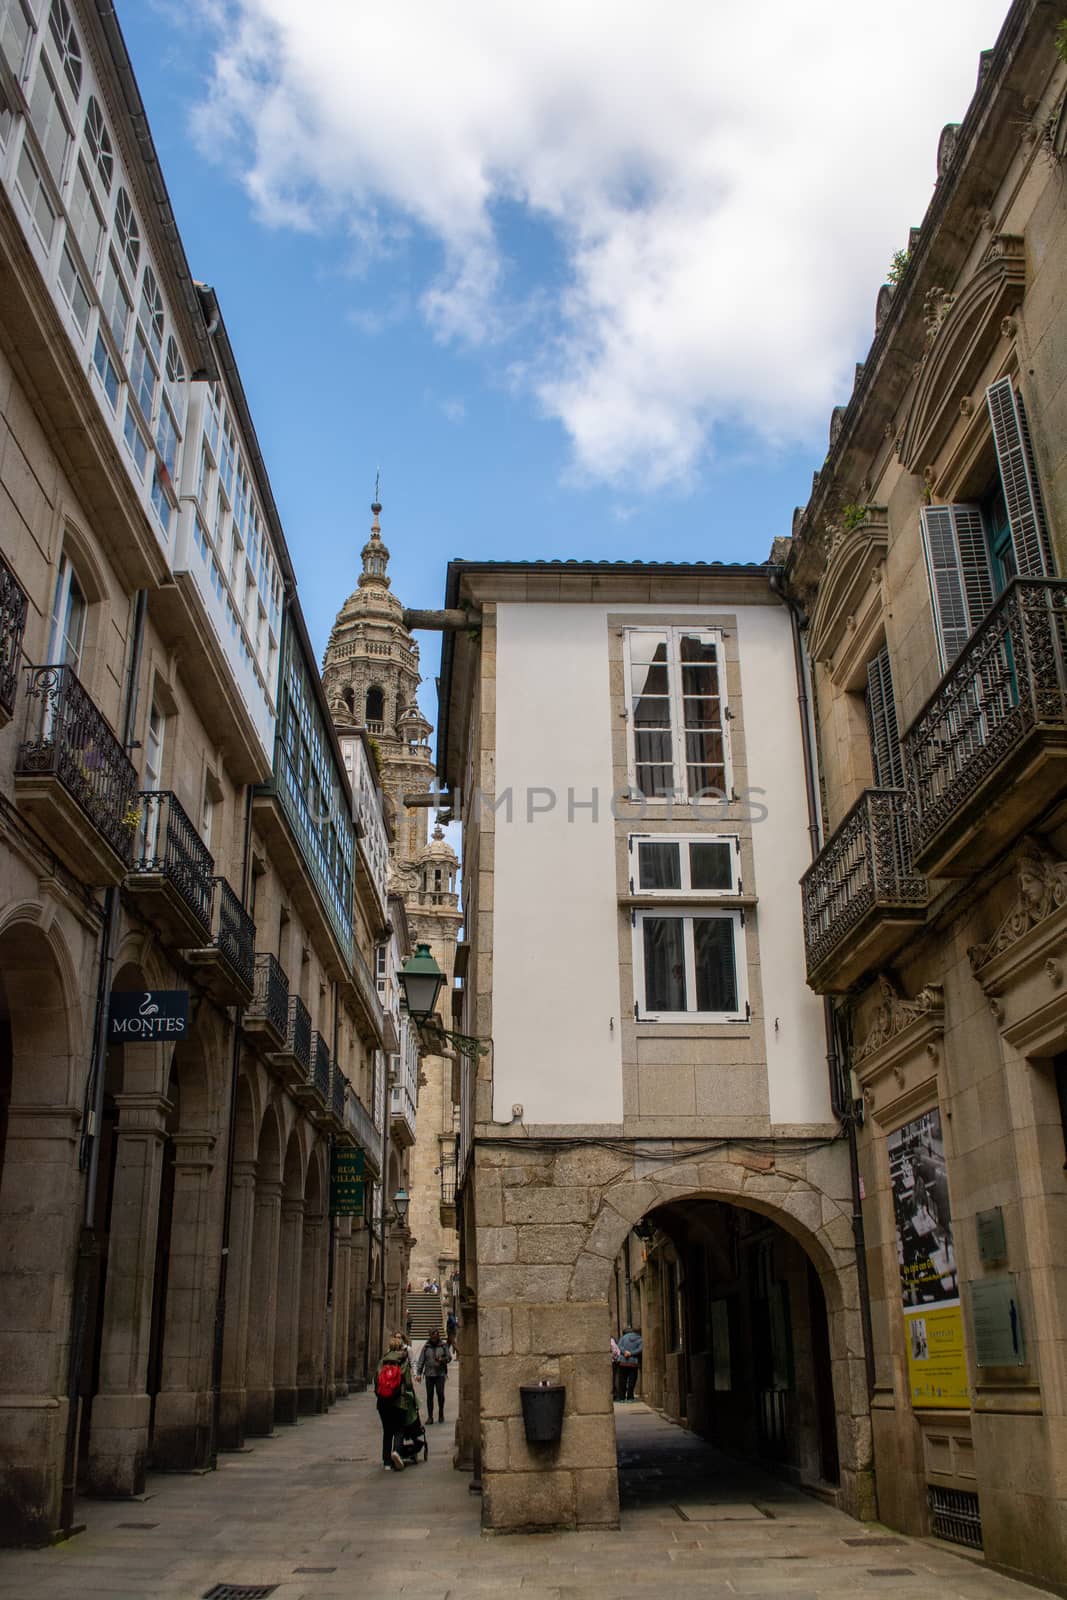 Santiago de Compostela, Spain, May 2018: View on the arcade streets of the old town of Santiago de Compostela in Spain